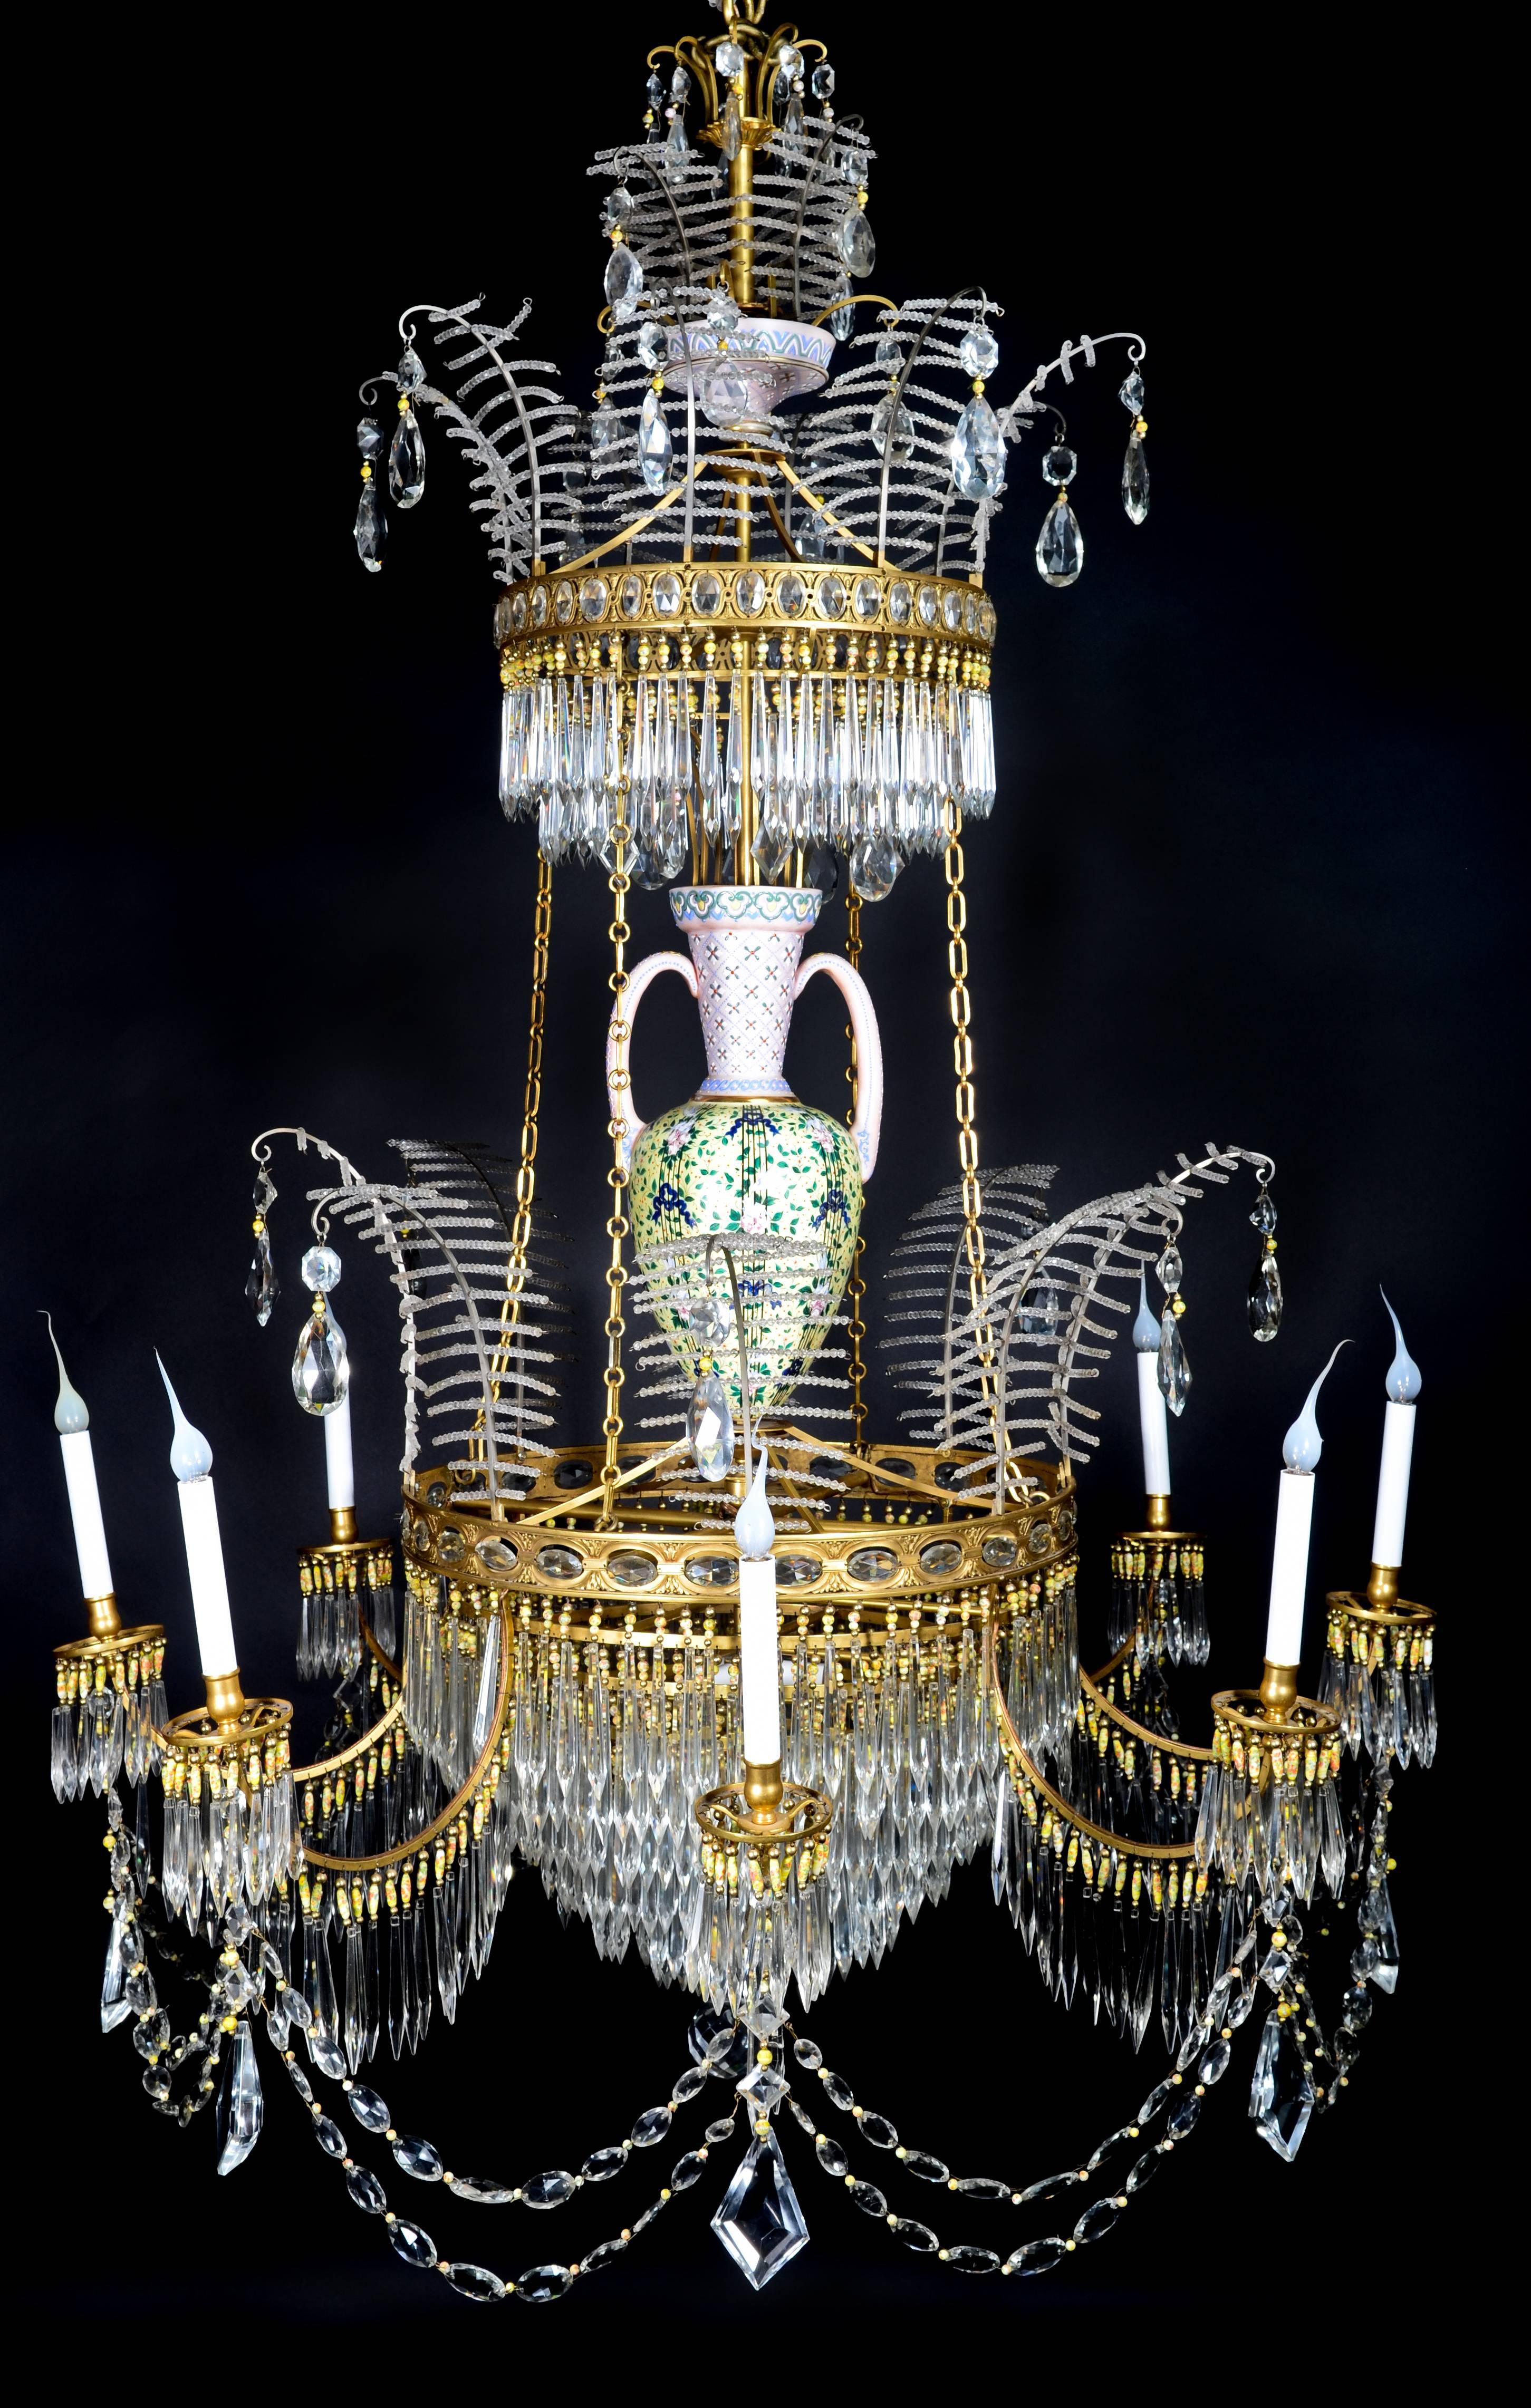 A palatial and large antique Russian neoclassical gilt bronze, cut crystal and opaline glass multi light chandelier of exquisite craftsmanship embellished with cut crystal prisms, chains, opaline glass beads and finally adorned with a large opaline